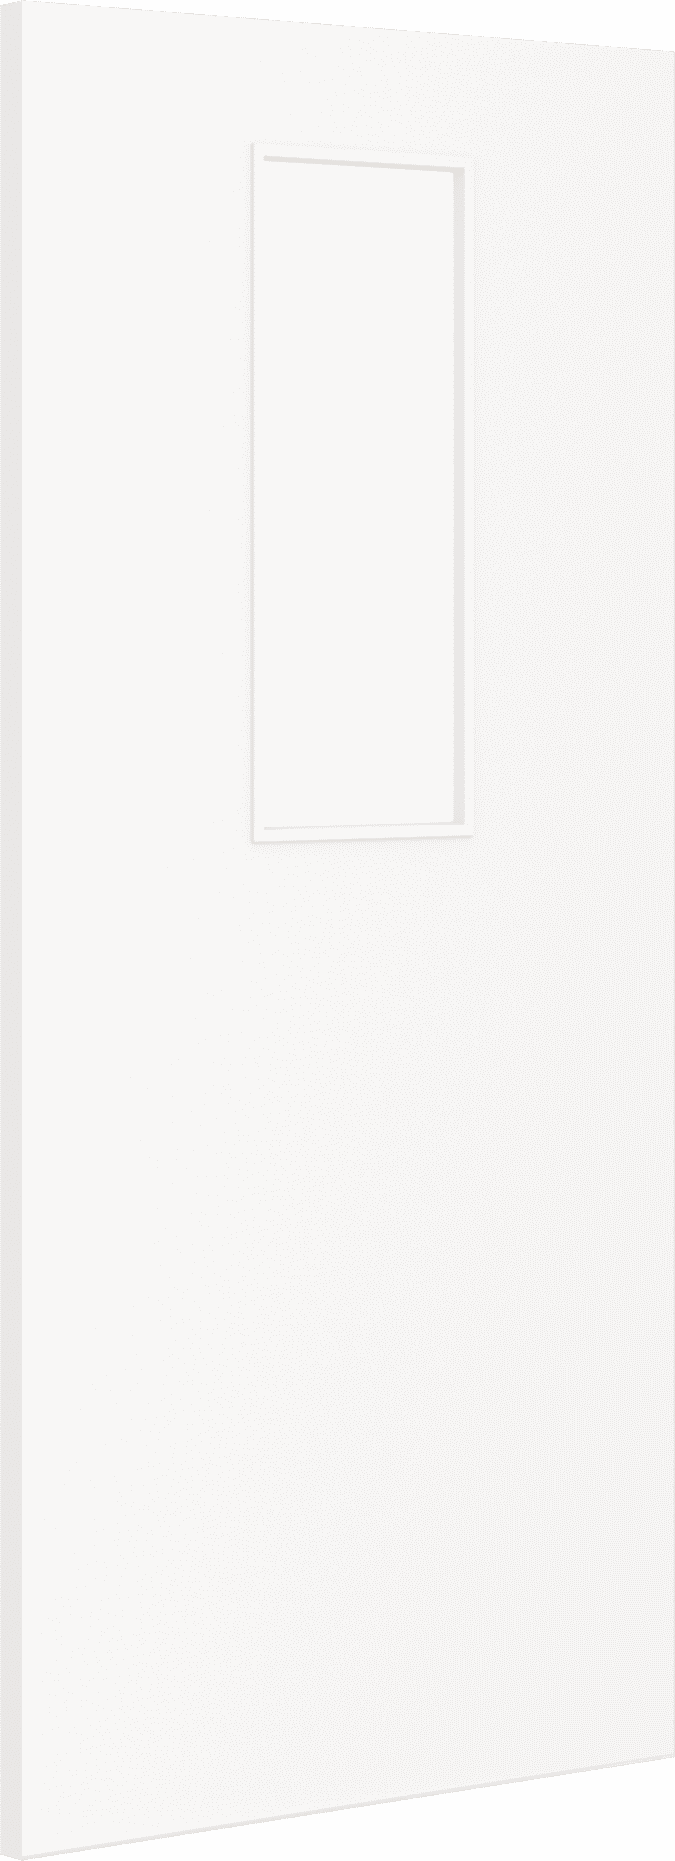 1981mm x 762mm x 44mm (30") Architectural Paint Grade White 14 Frosted Glazed Fire Door Blank